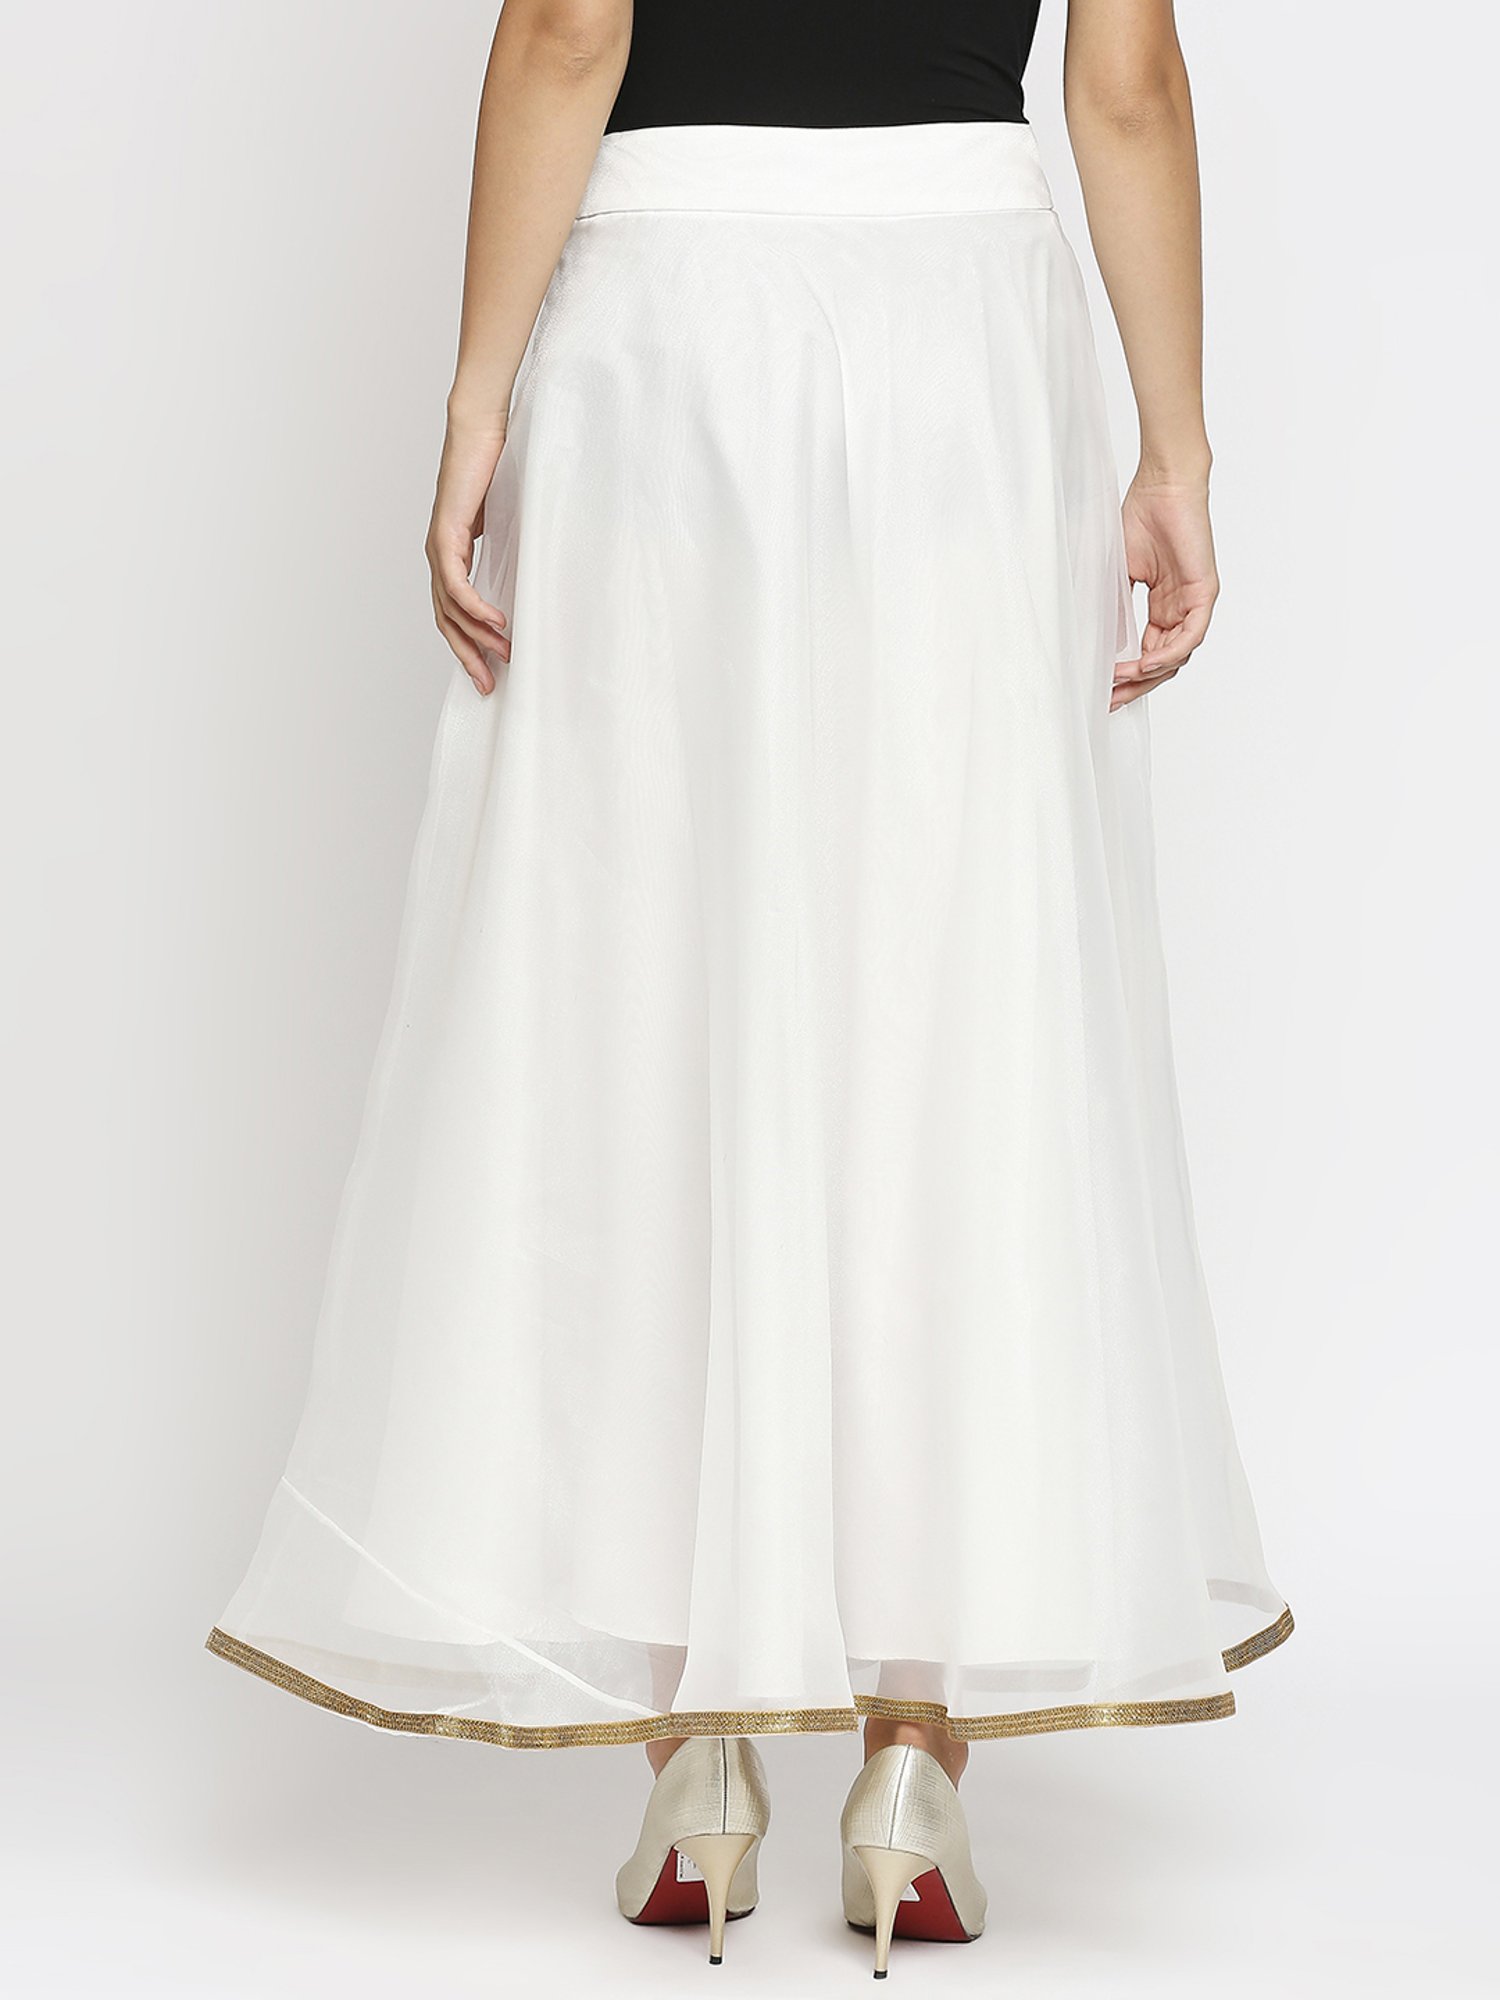 Get Classic White Skirt Palazzo at ₹ 1799 | LBB Shop